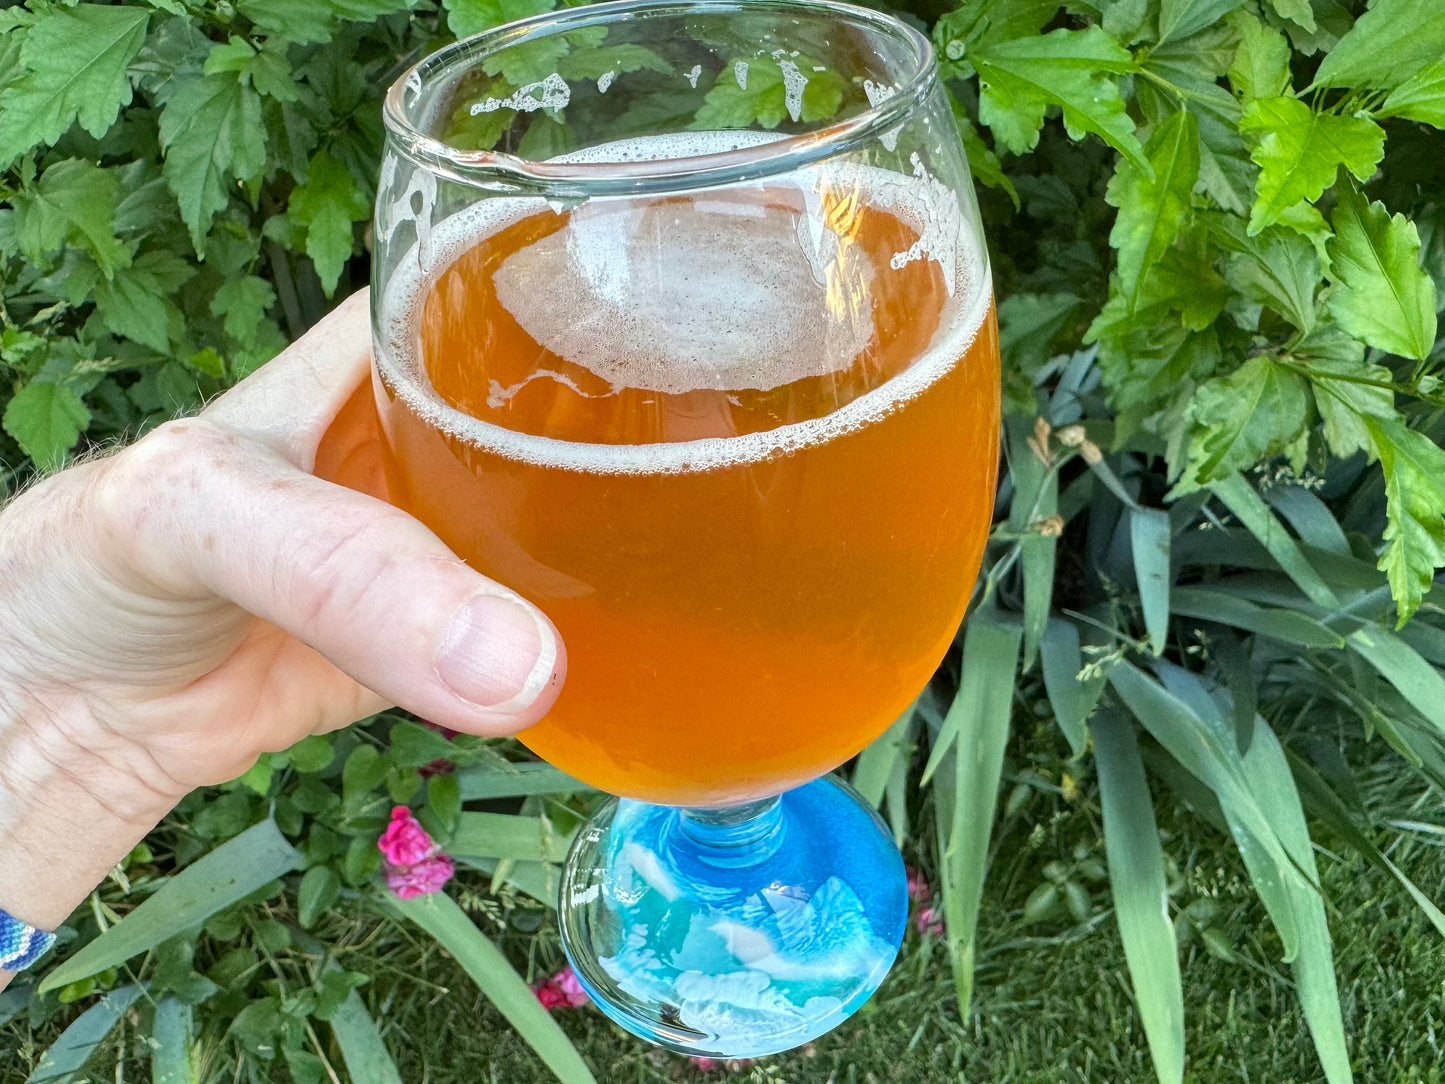 Resin Ocean Wave Beer Glass for The Ocean Lover who wants that Coastal Vibe in home decor and barware, Decorated Pint Glasses for Beer Lover